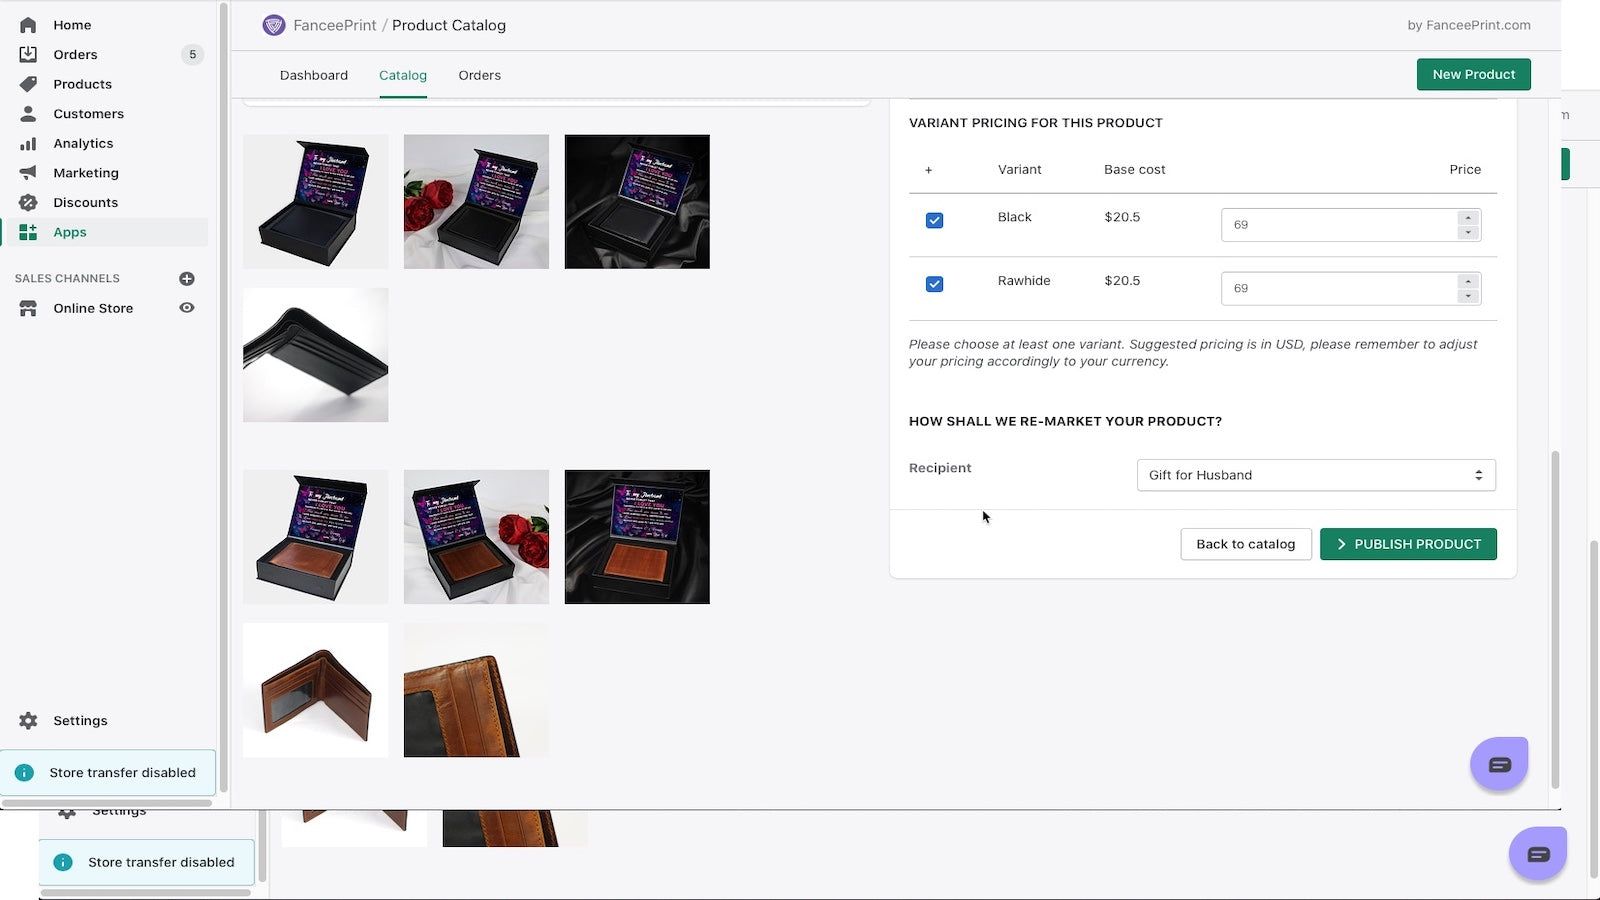 Auto generate product preview images